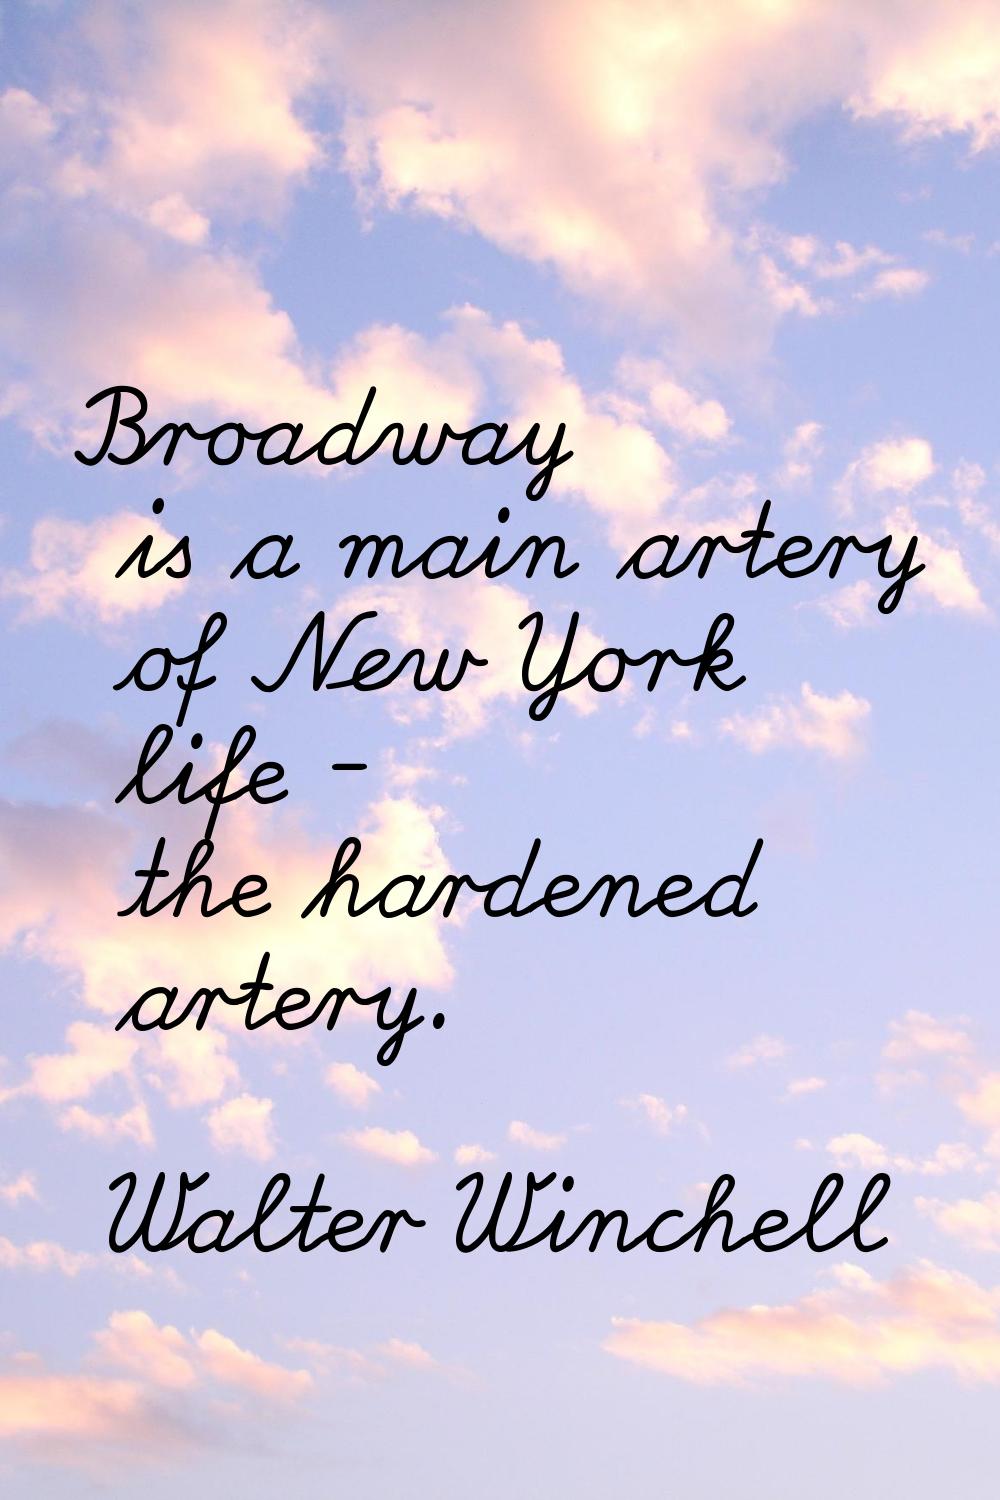 Broadway is a main artery of New York life - the hardened artery.